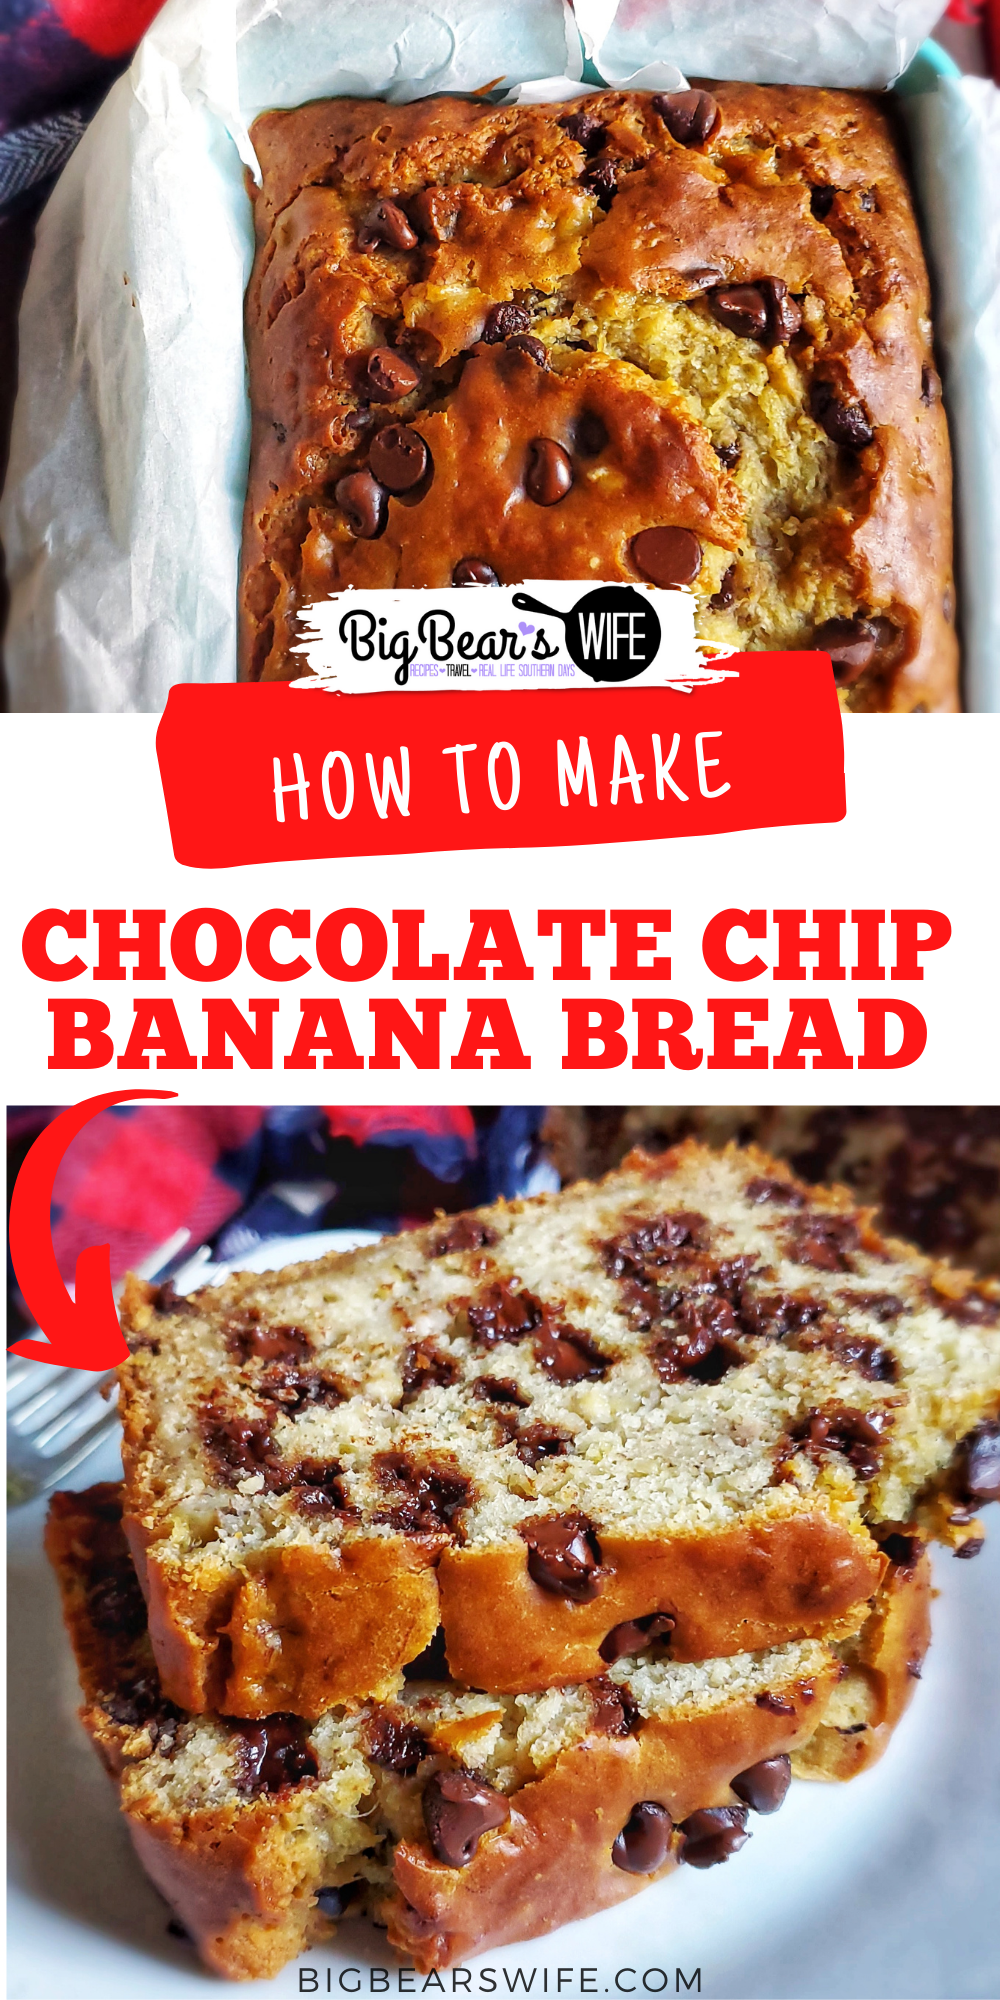 Love Banana Bread? This Chocolate Chip Banana Bread is a delicious homemade banana bread recipe that is packed with 2 cups of chocolate chips! Amazing for breakfast, dessert or a snack!  via @bigbearswife